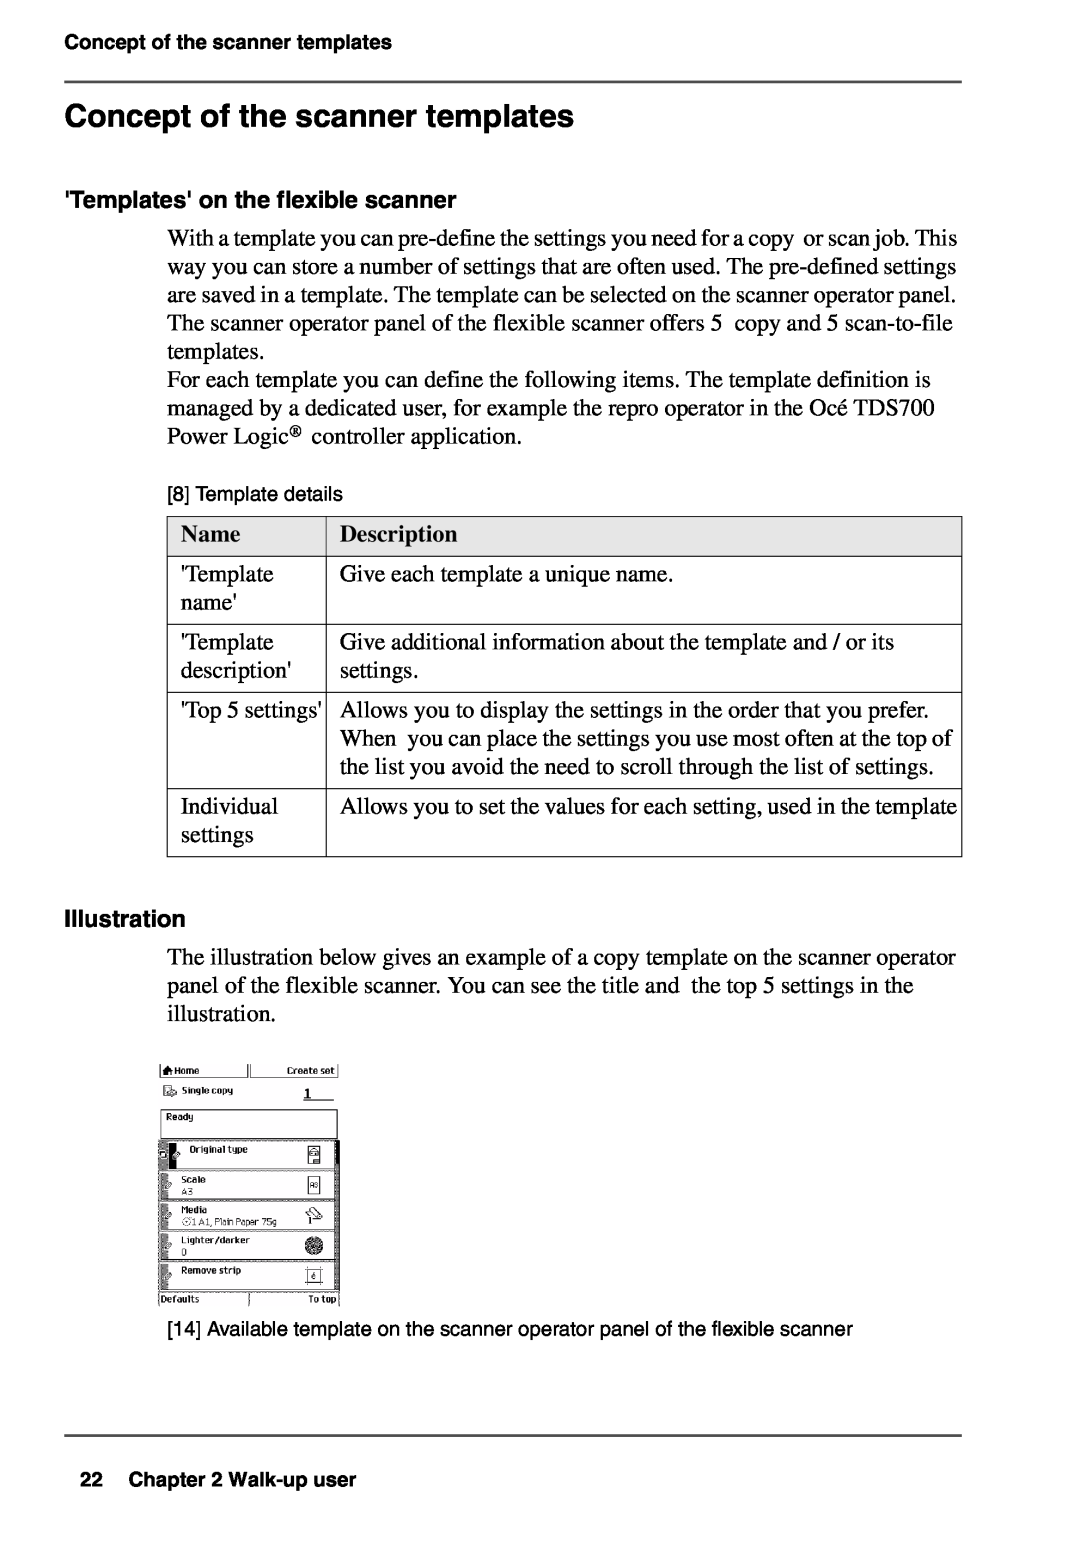 Oce North America TDS700 user manual Concept of the scanner templates, Templates on the flexible scanner, Name, Description 